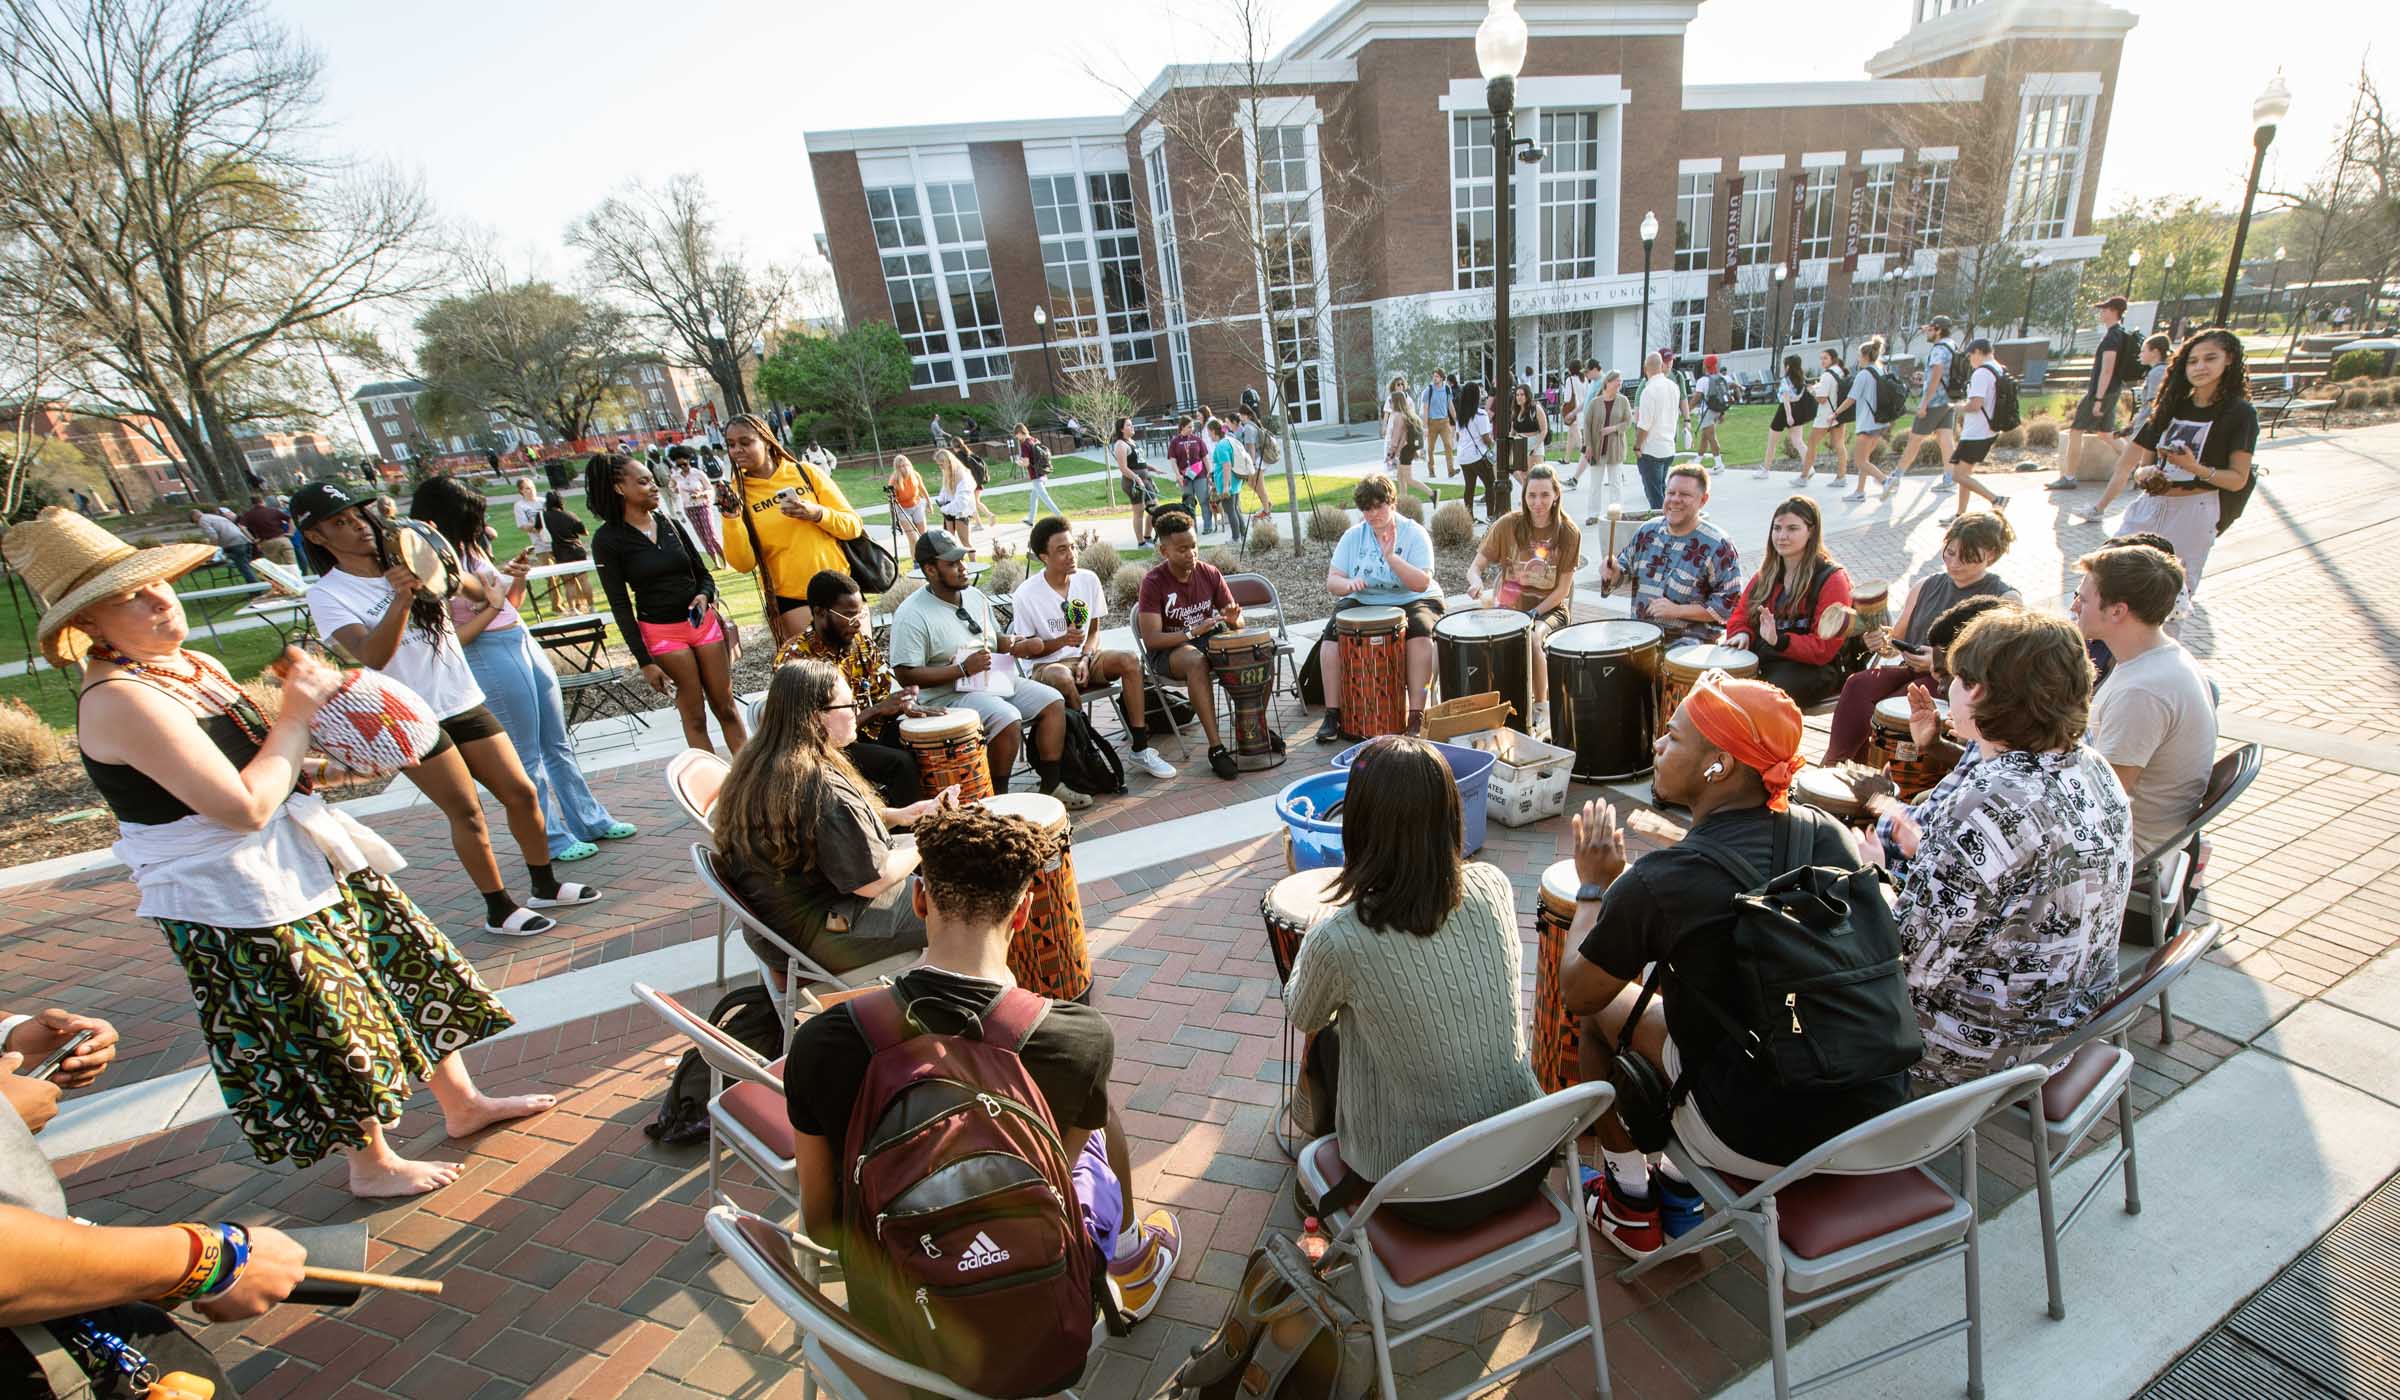 A drum circle plays in the setting sun on the YMCA Plaza, with Colvard Union and passersby in the background.